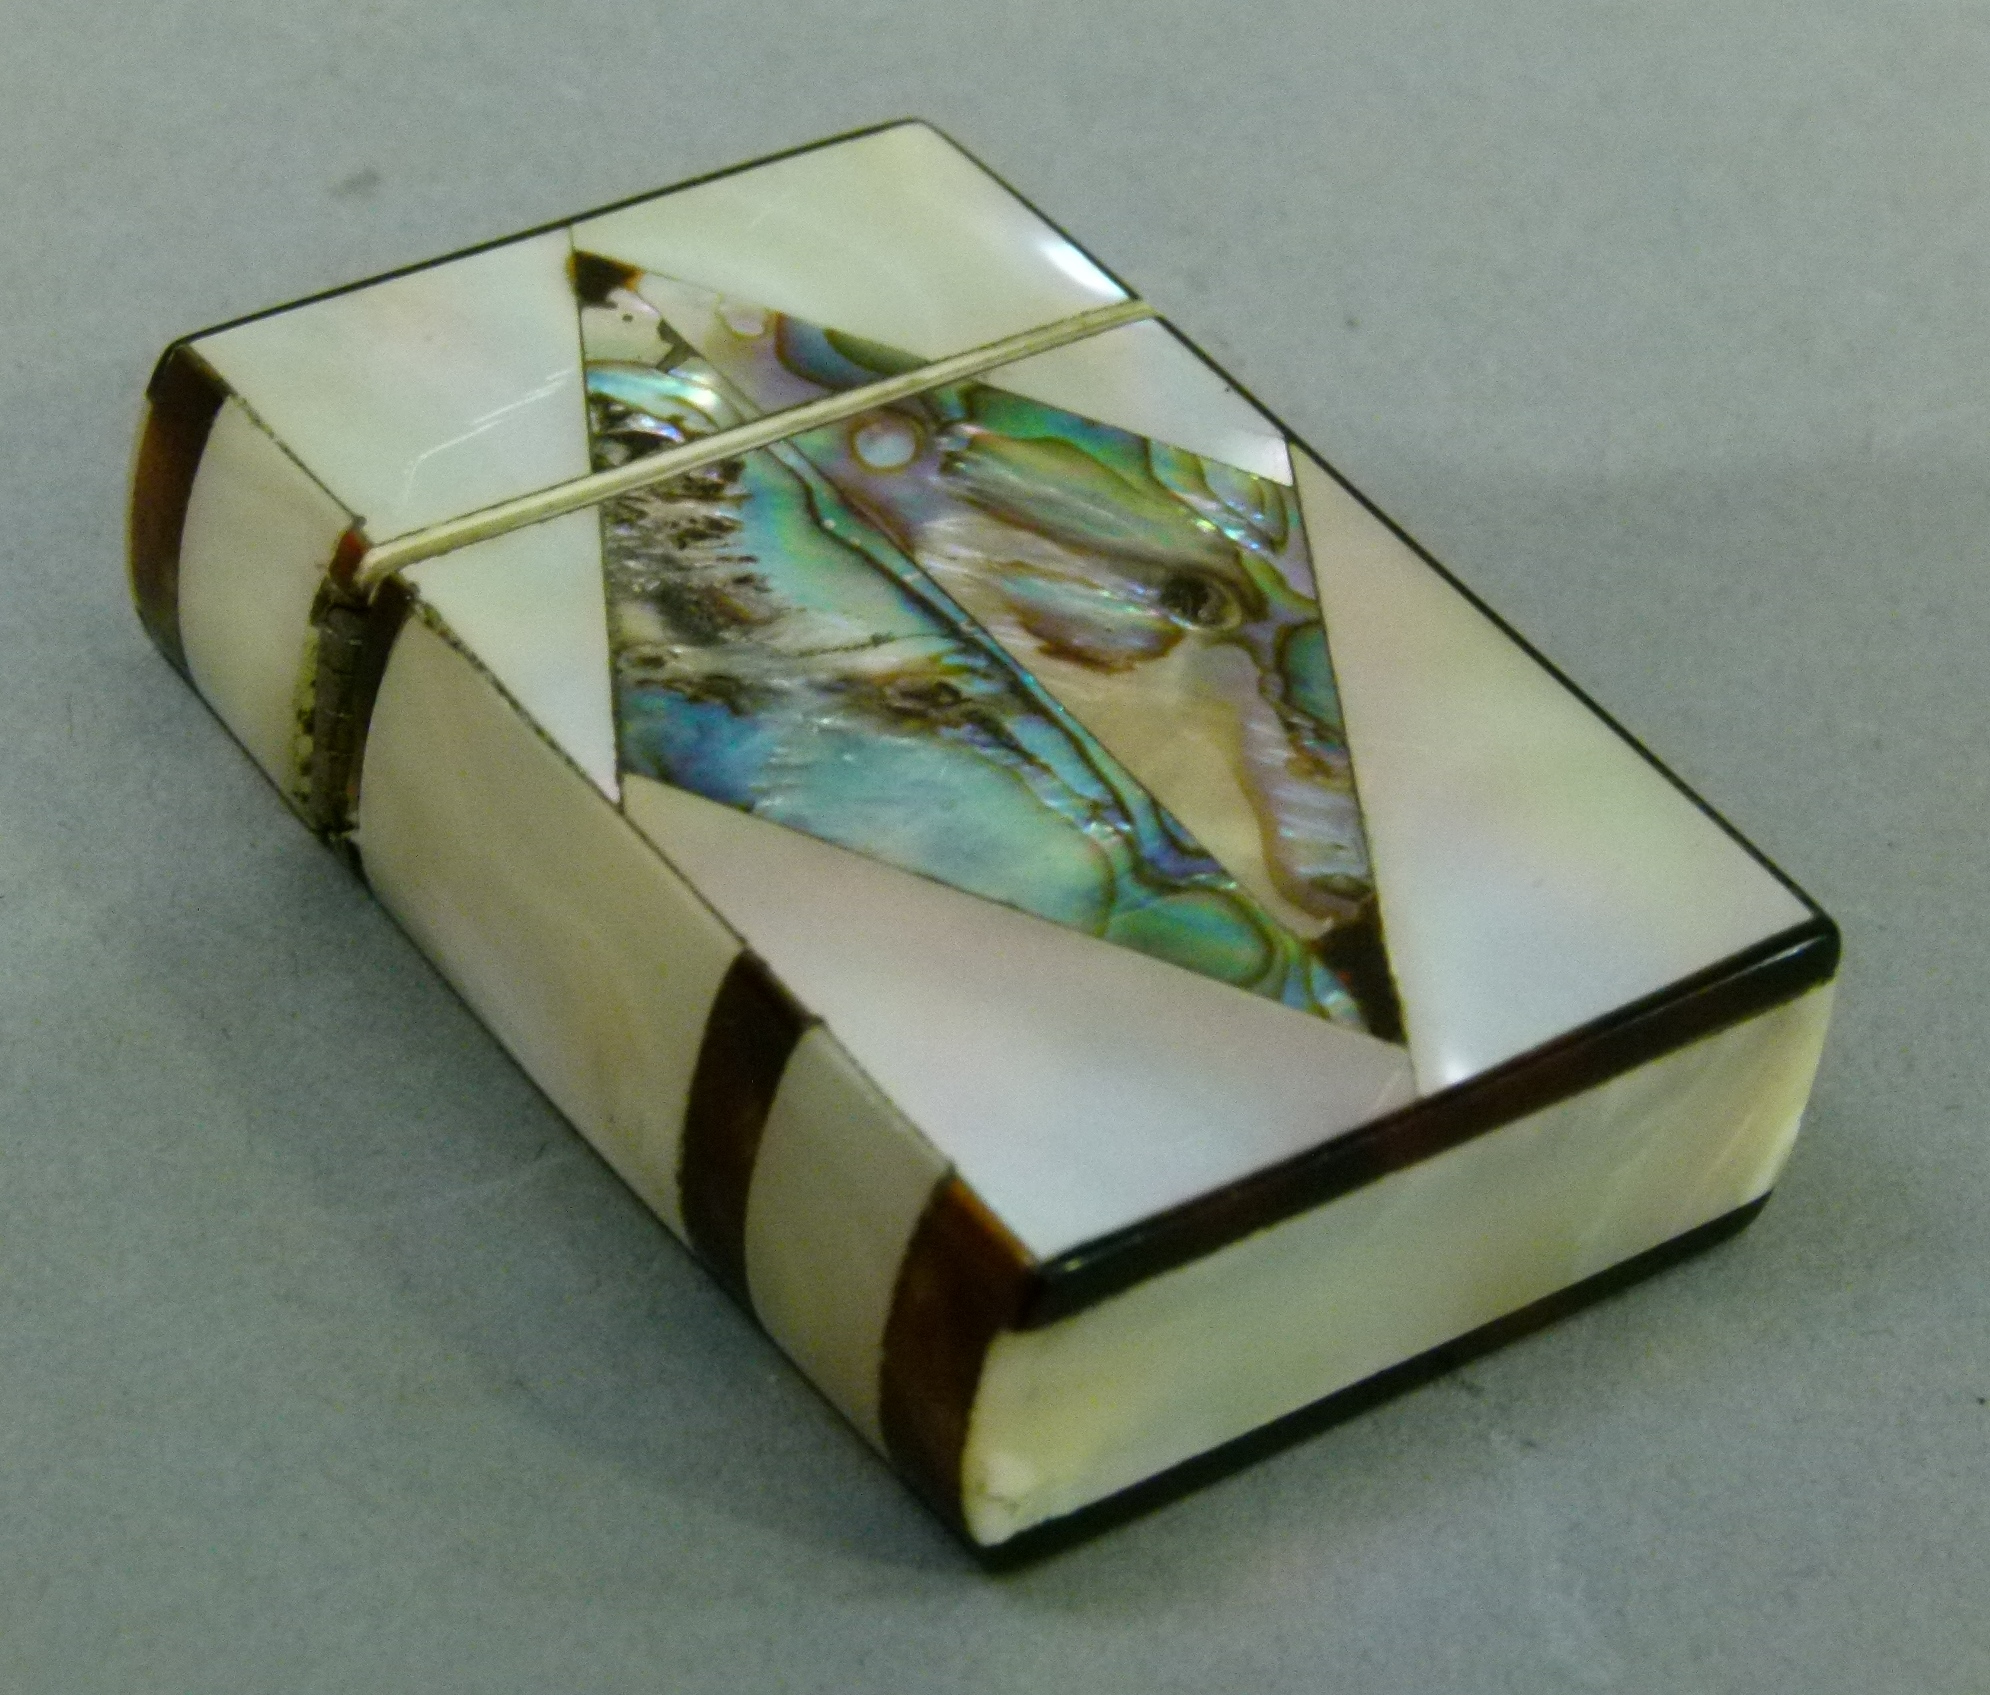 A 19th century miniature calling card case in mother-of-pearl, abalone and tortoiseshell, the - Image 2 of 4